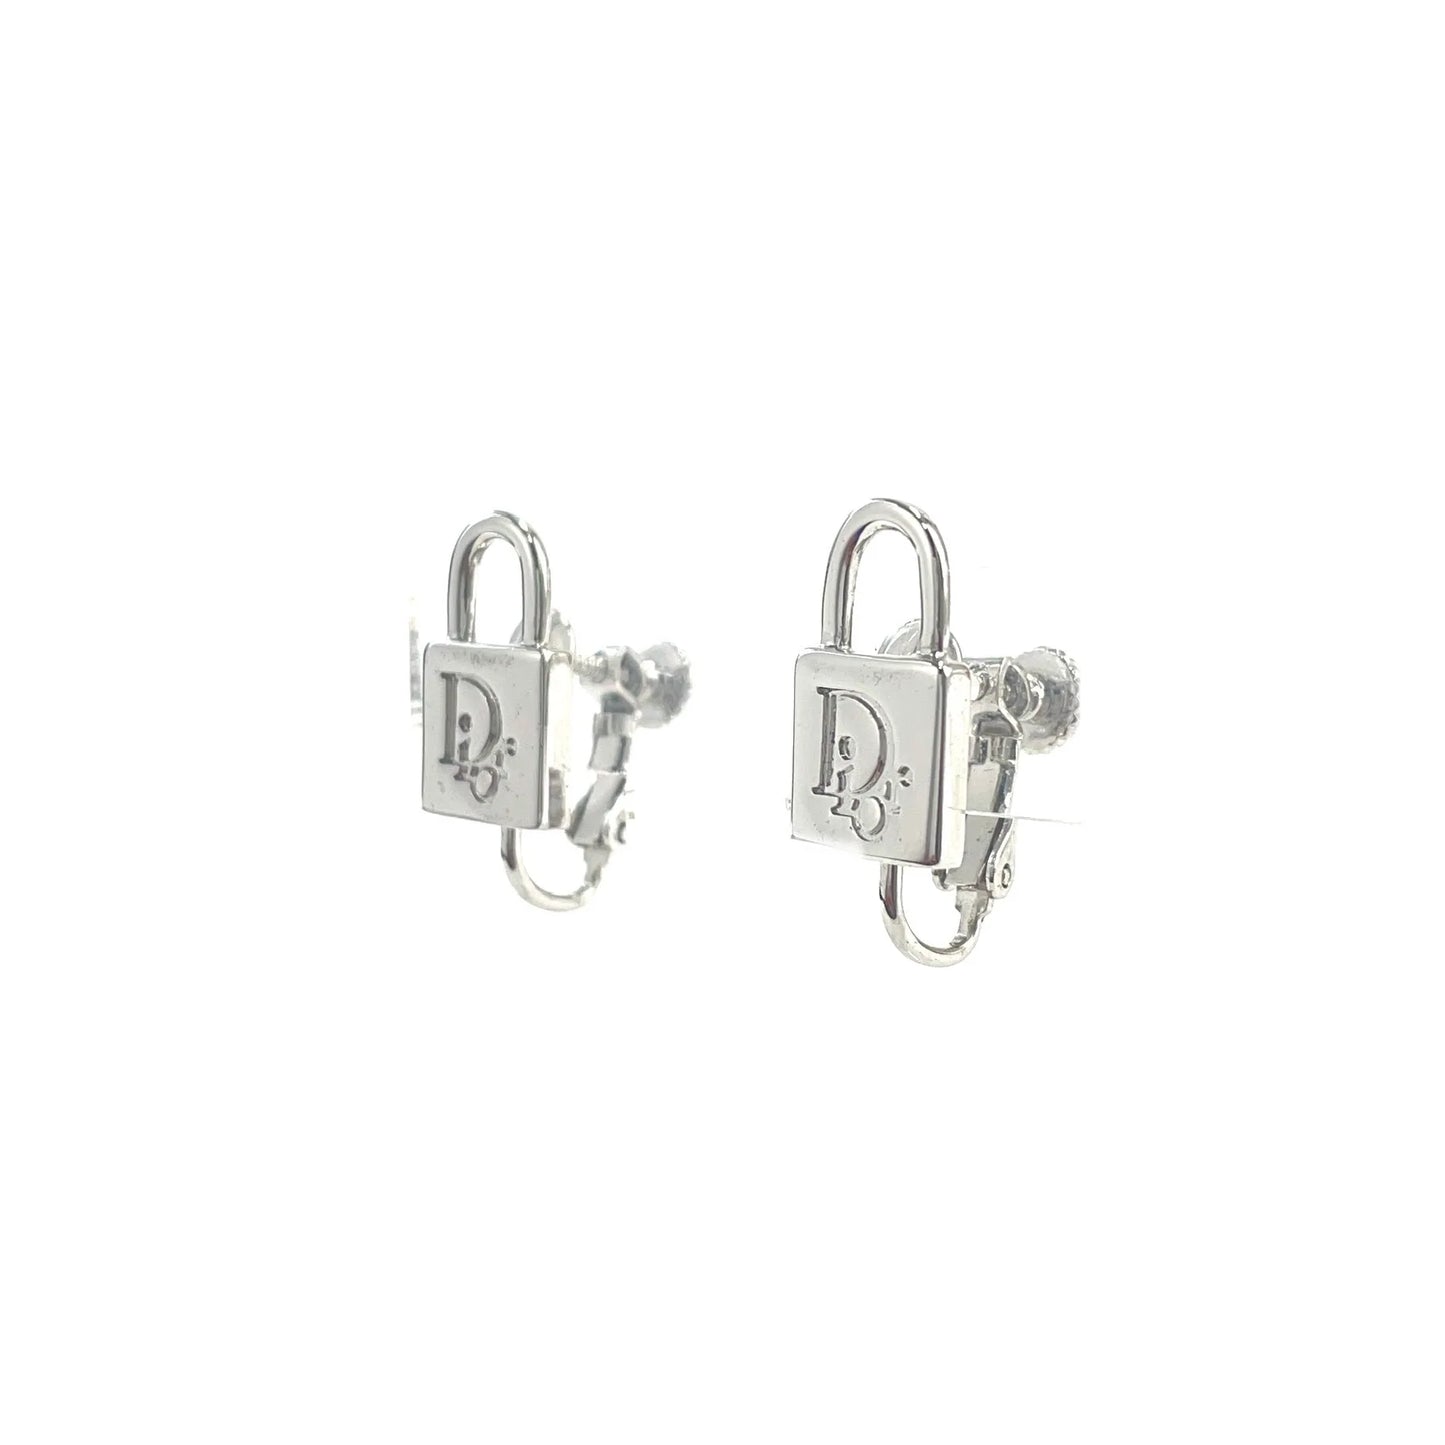 Christian Dior Padlock Earrings Silver Accessory Vintage Old awffef